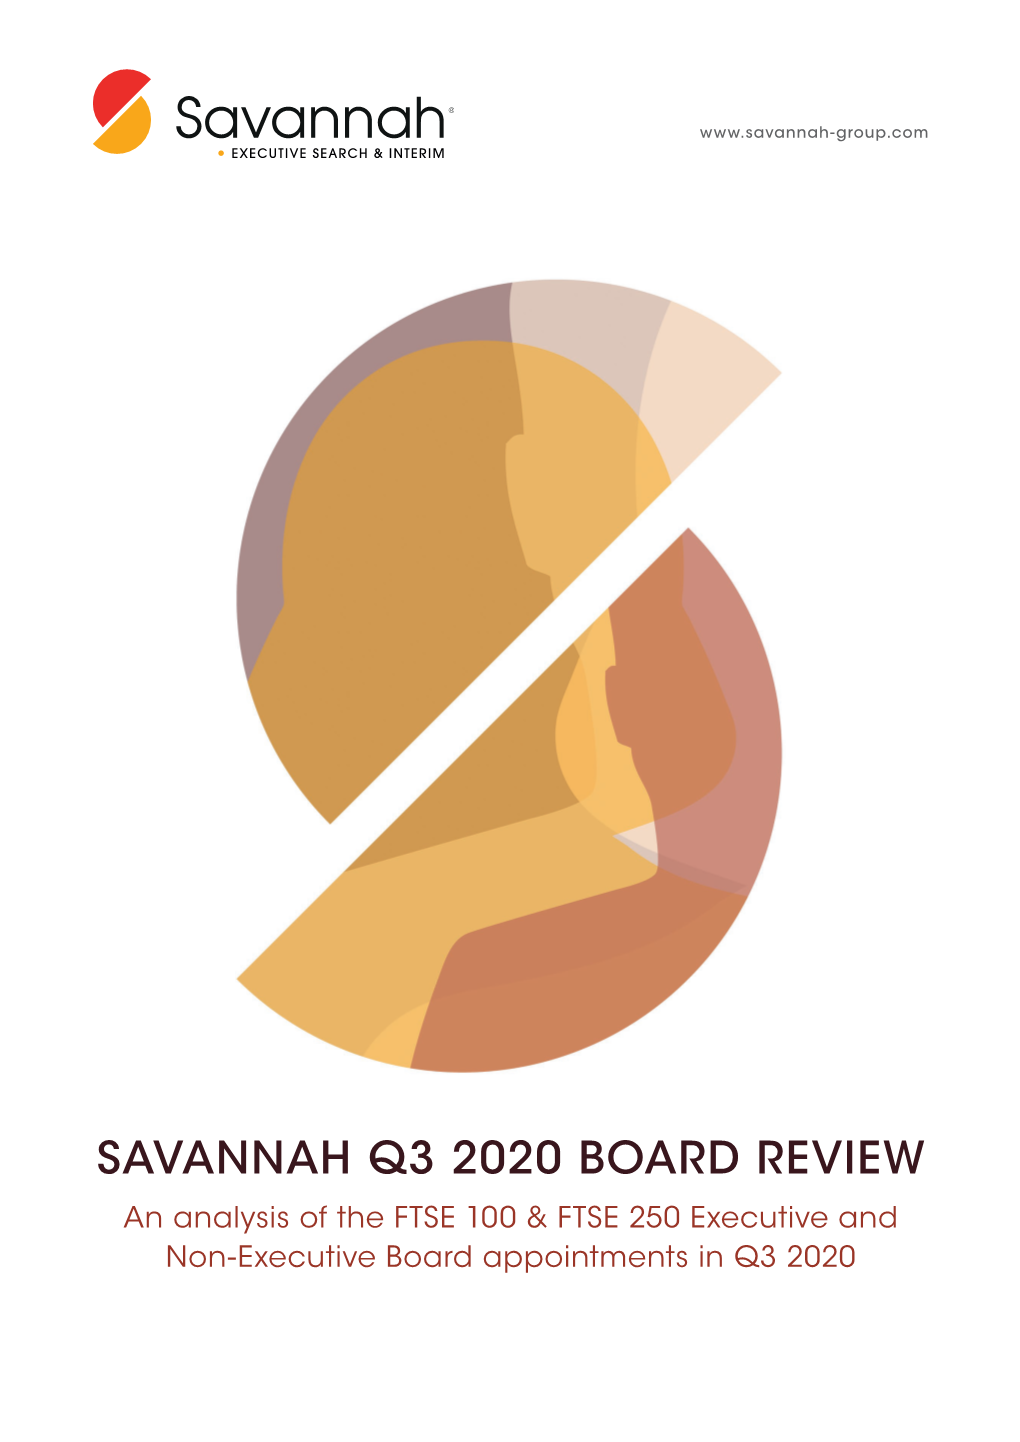 SAVANNAH Q3 2020 BOARD REVIEW an Analysis of the FTSE 100 & FTSE 250 Executive and Non-Executive Board Appointments in Q3 2020 INTRODUCTION